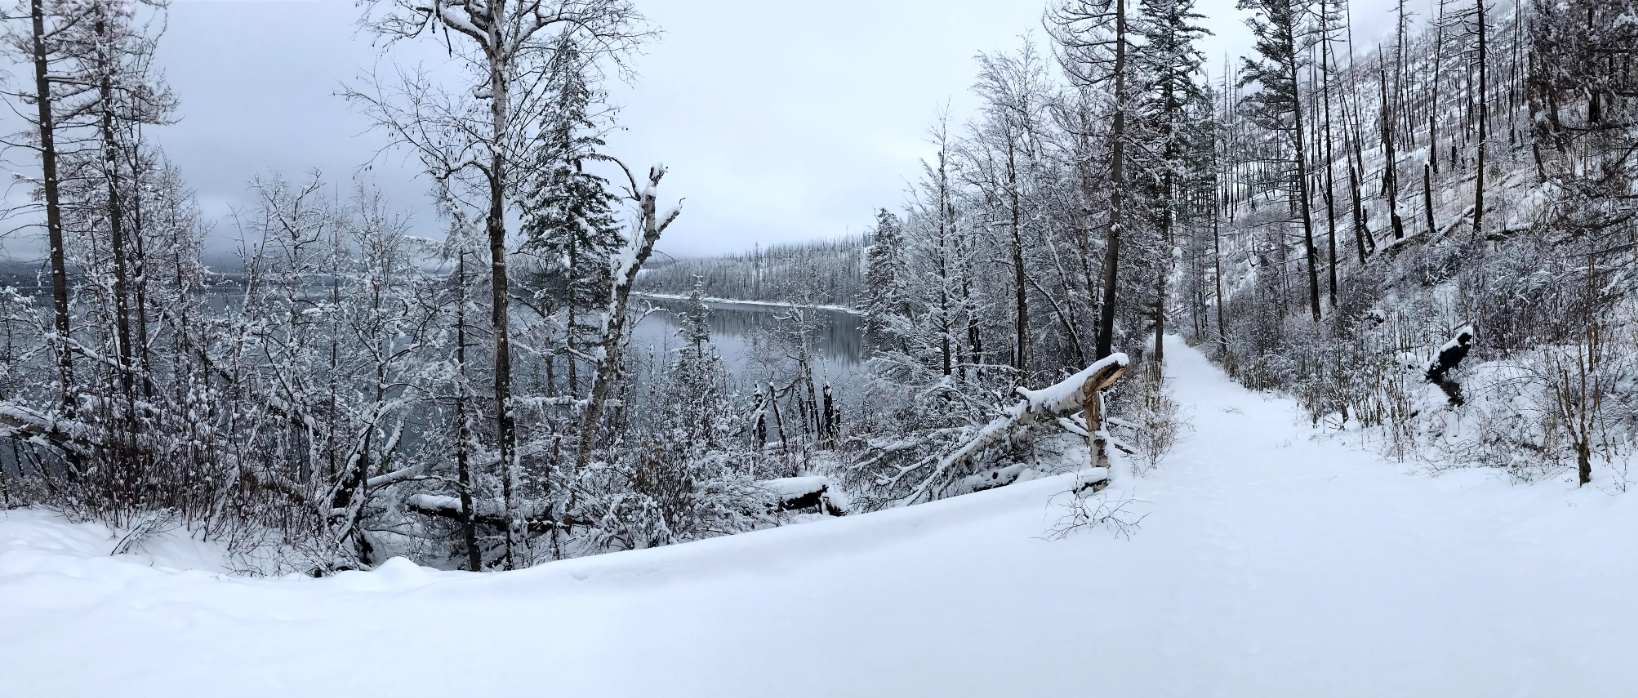 a snowy forest with Lake Mcdonald in background